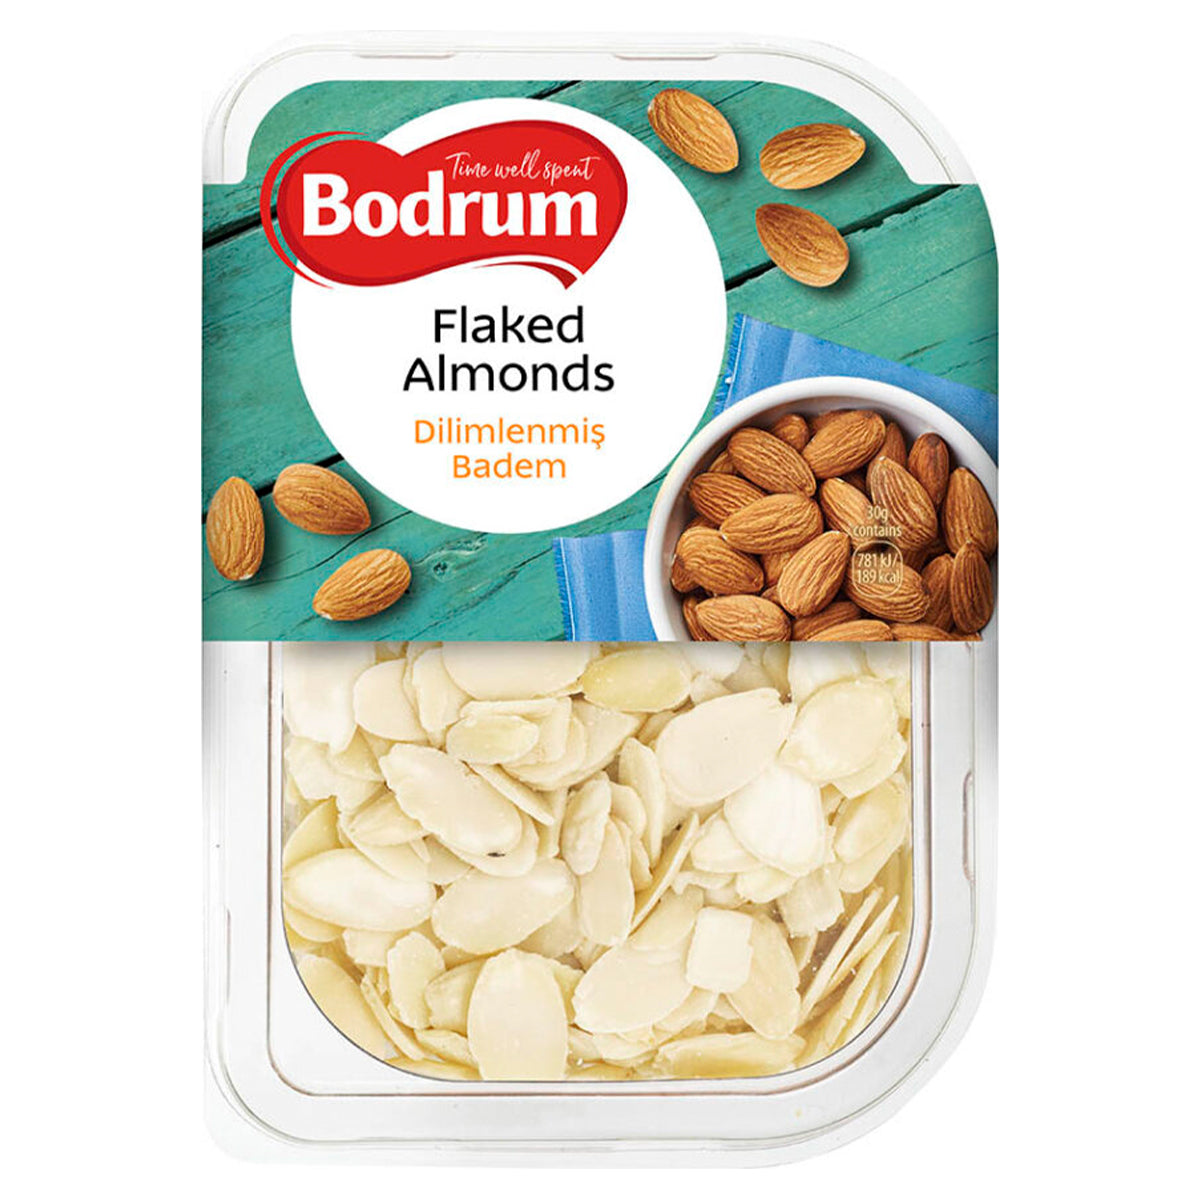 Bodrum - Flaked Almonds - 150g - Continental Food Store